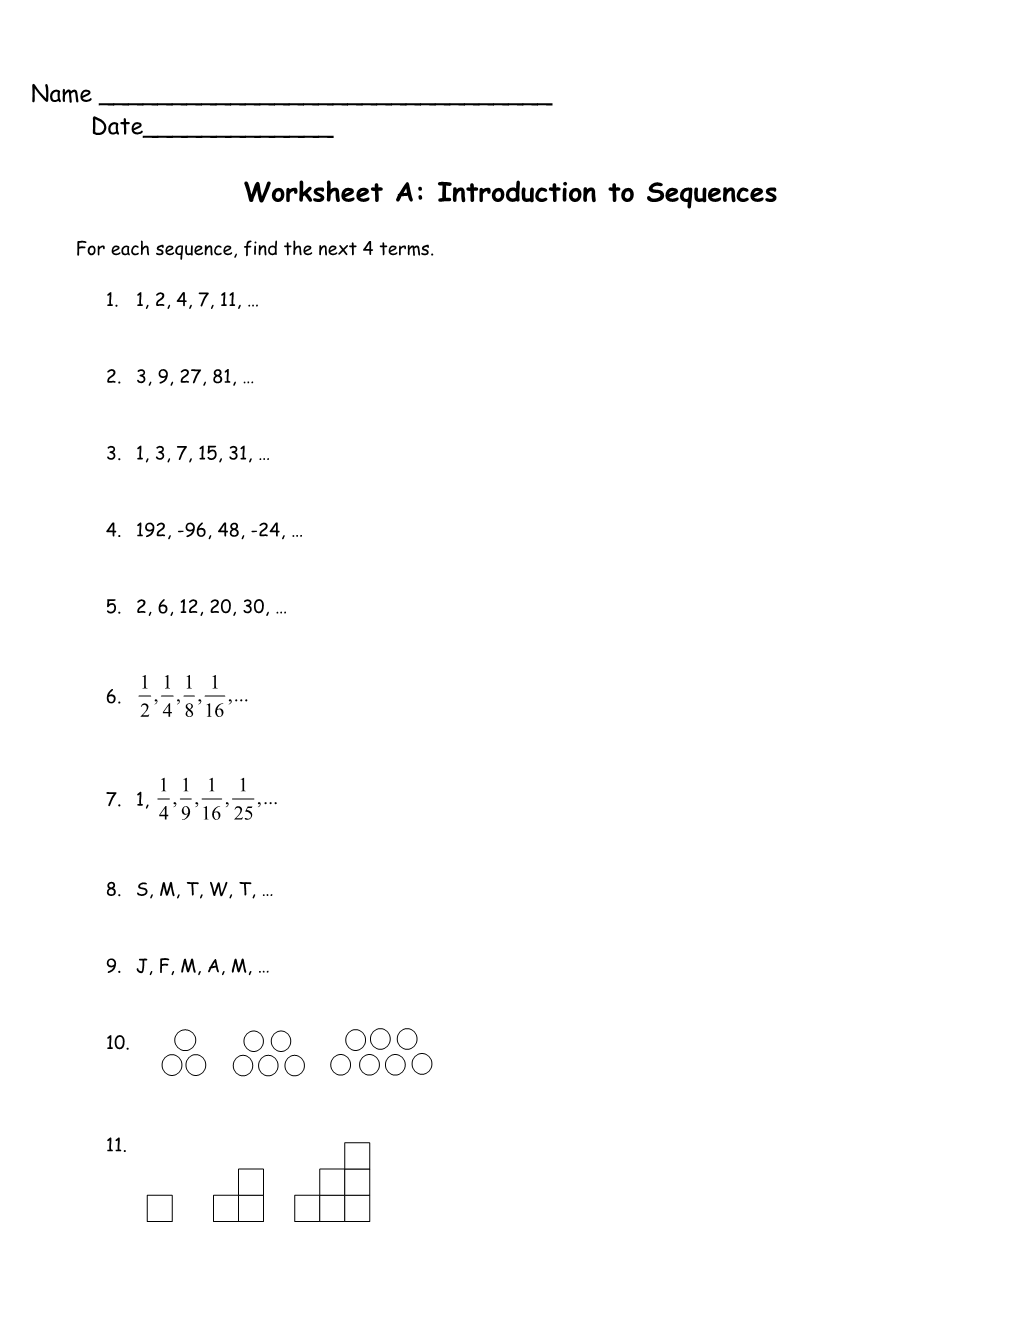 For Each Sequence, Find the Next 4 Terms